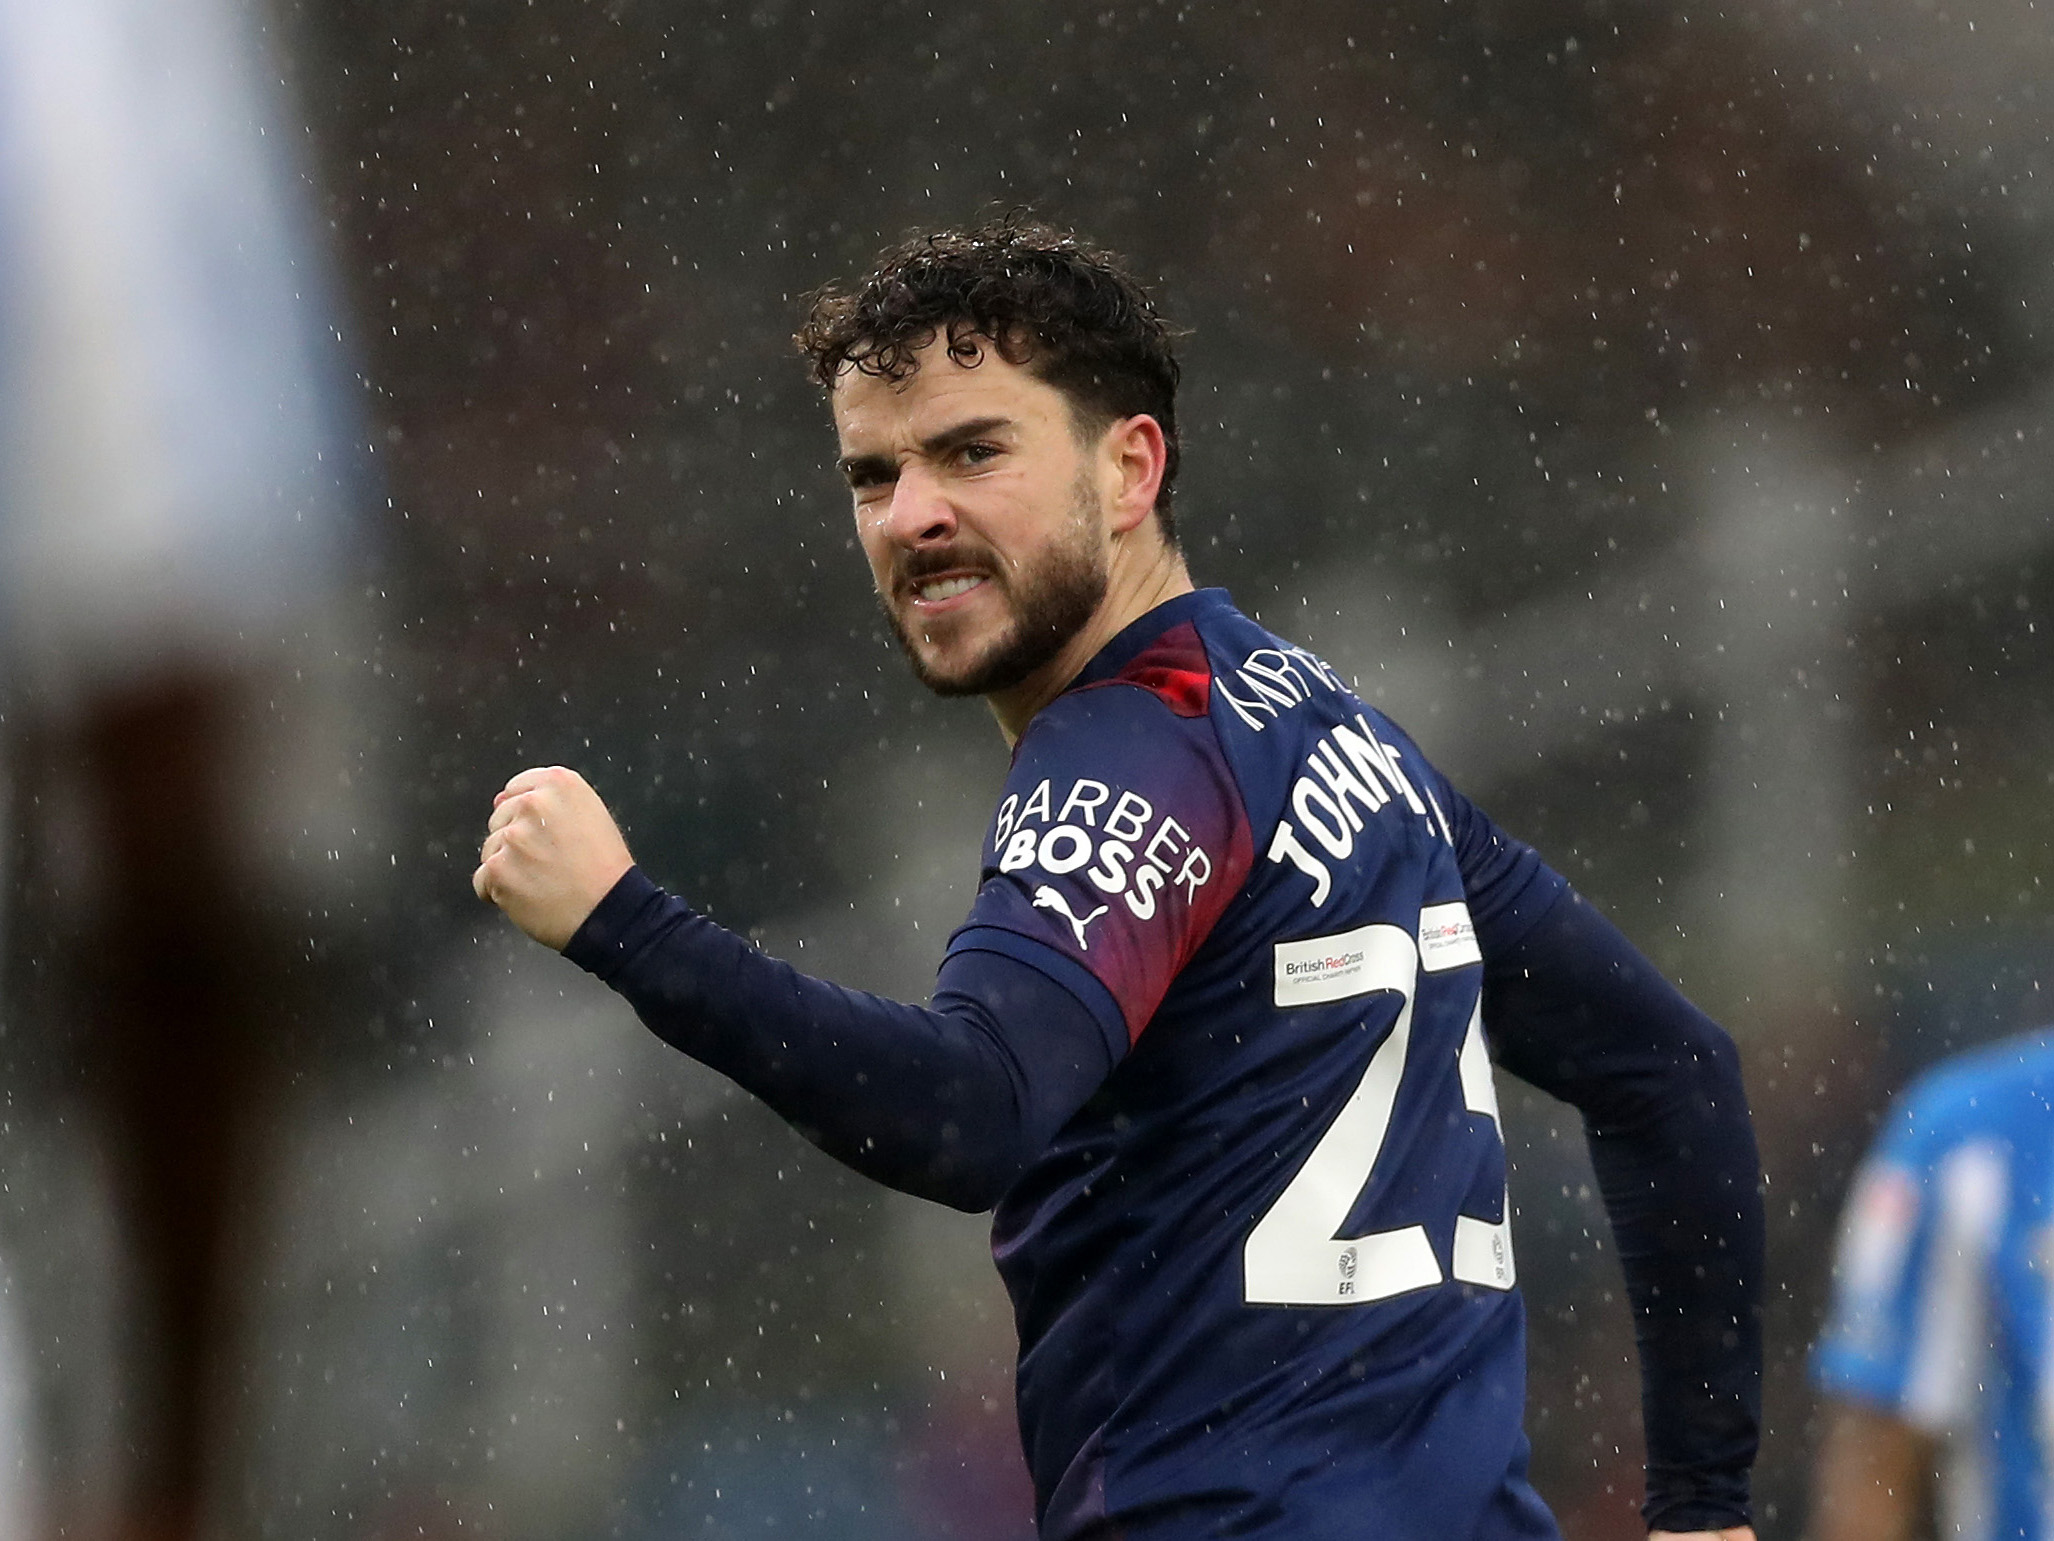 Mikey Johnston celebrates scoring against Huddersfield while wearing Albion's navy blue and red kit